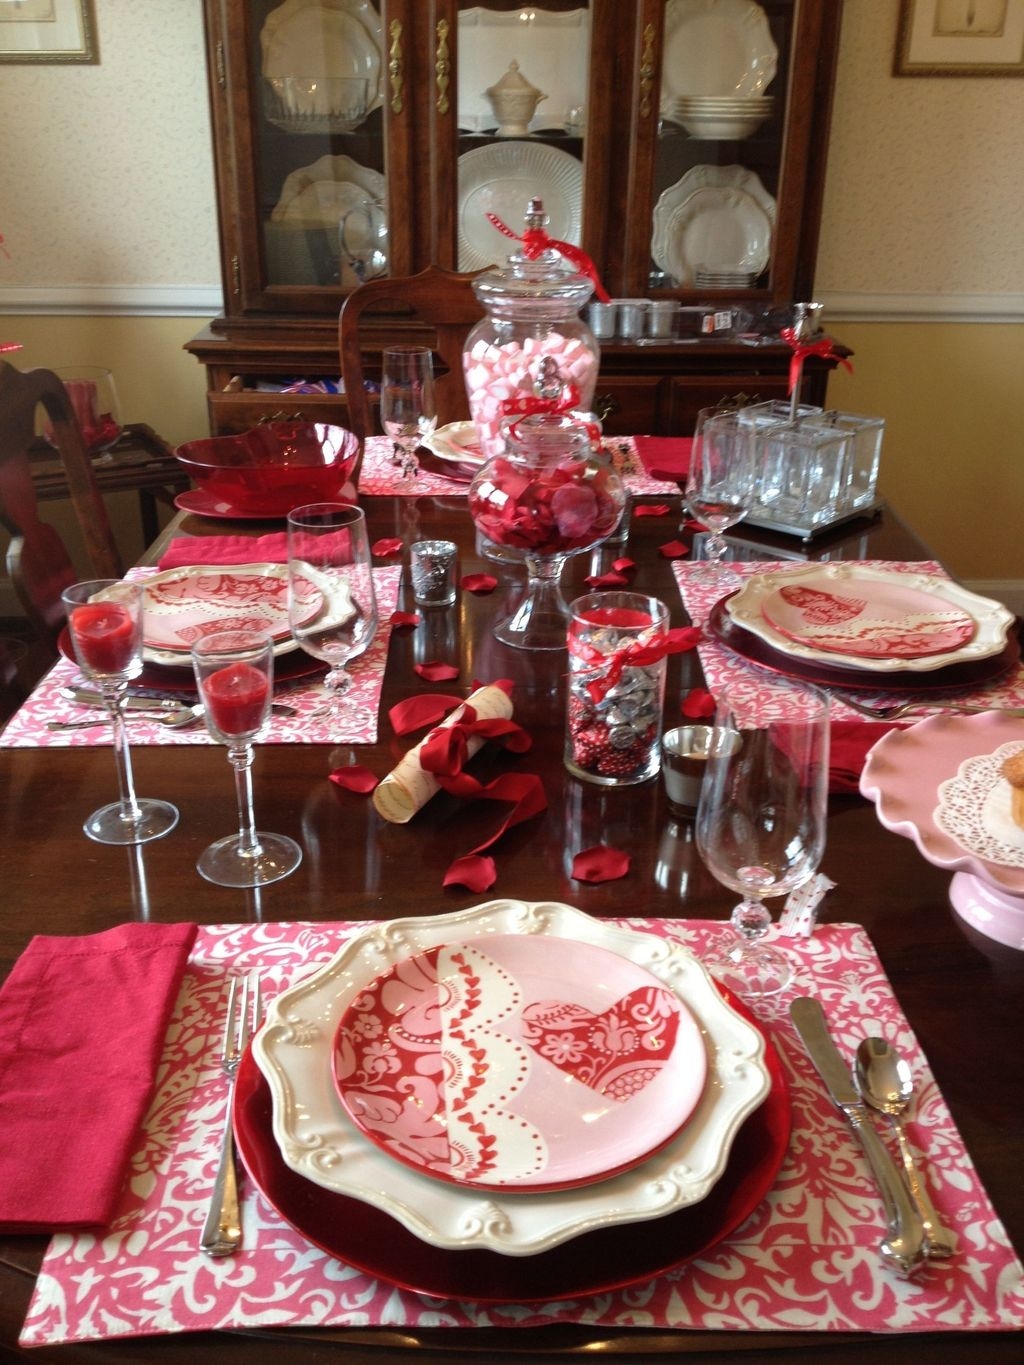 Perfect Valentine’s Day Romantic Dining Table Decor Ideas For Two People 24